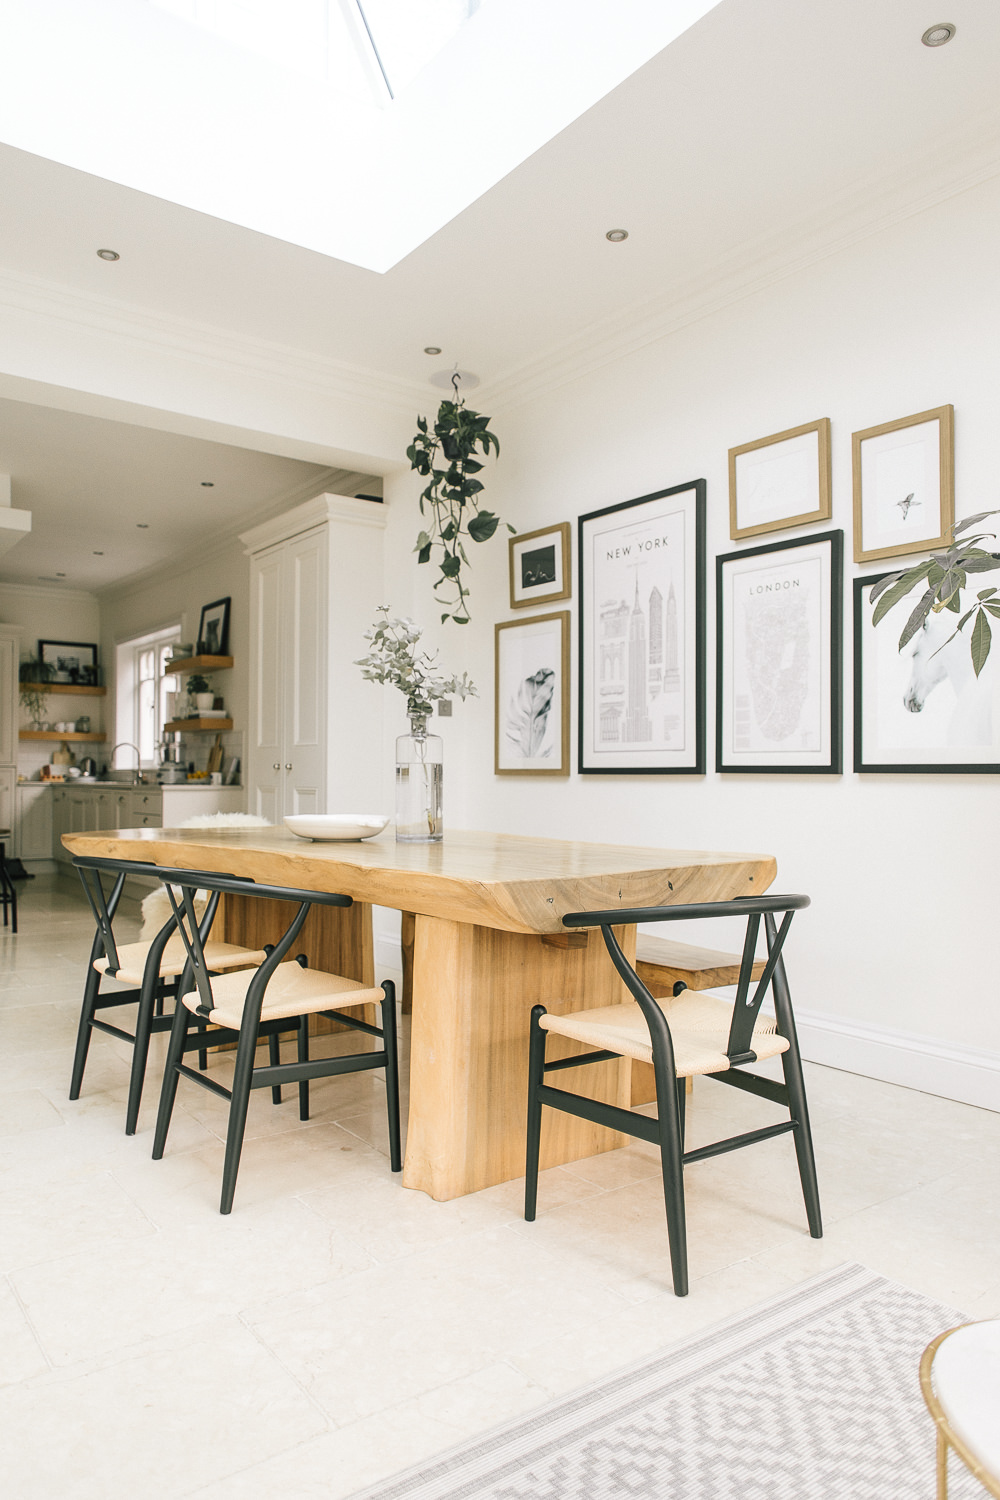 Gallery wall, wishbone chairs and Bali table